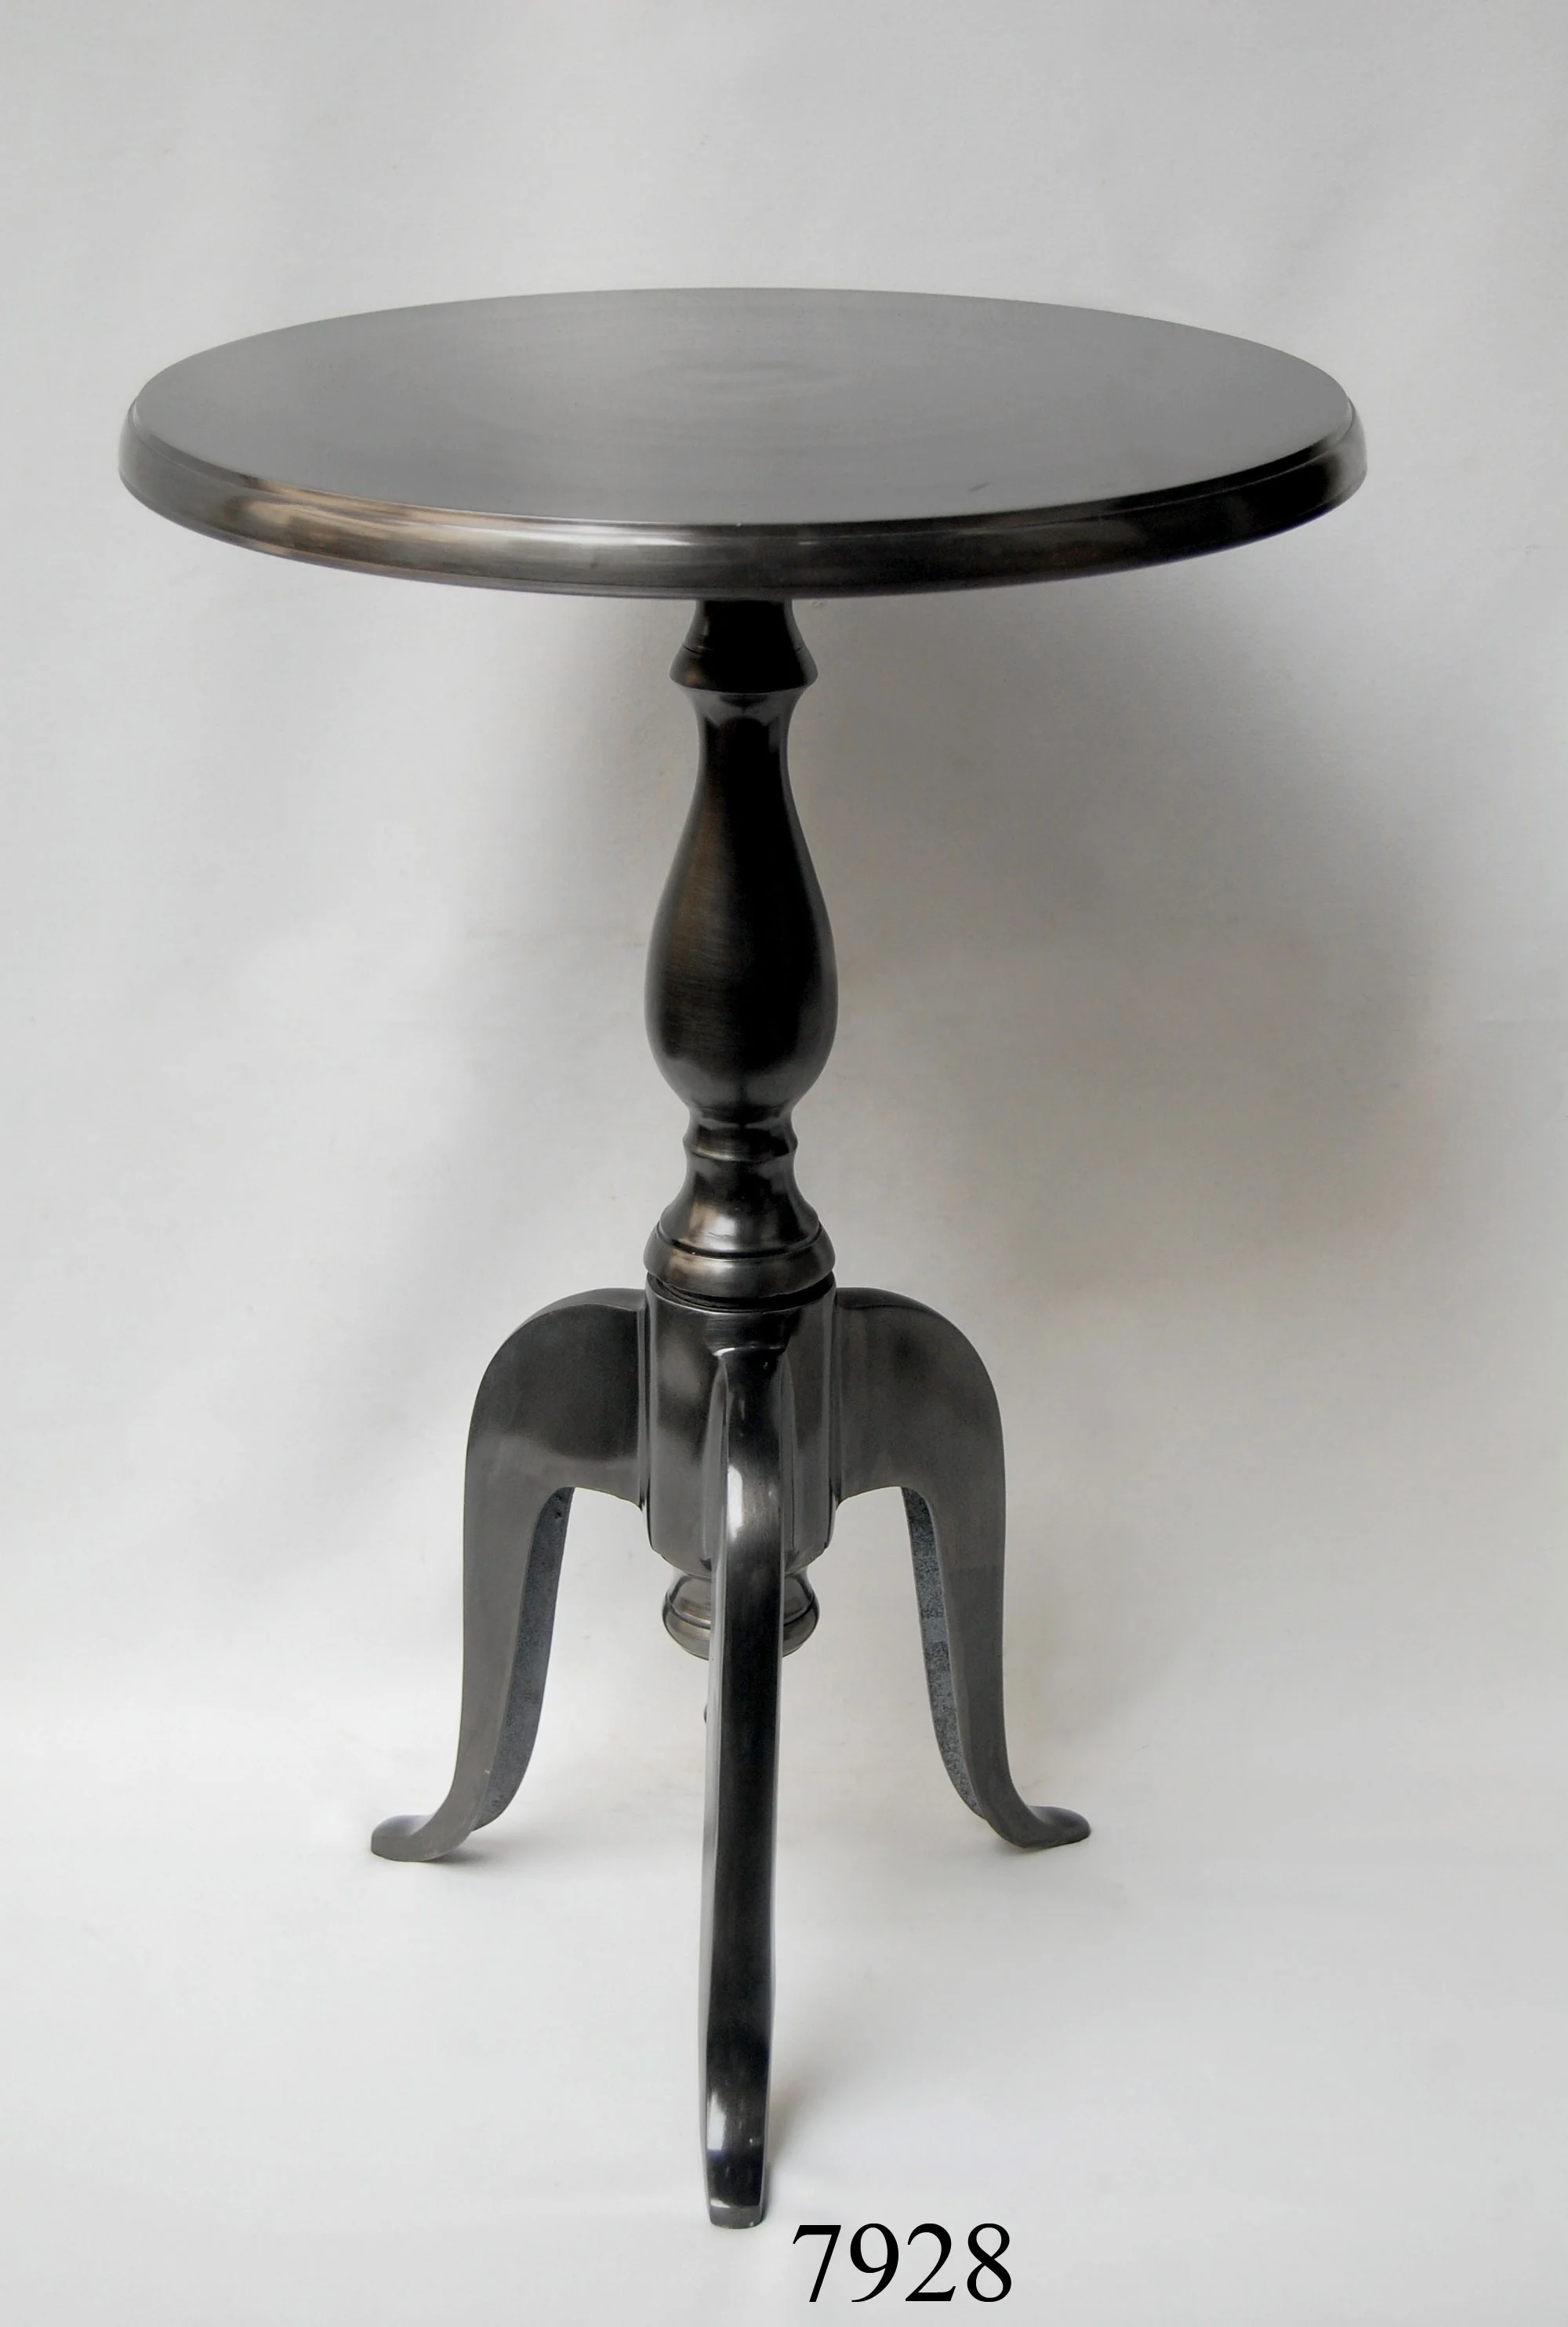 New Arrival Metal Coffee table standard size Plain Polished Tall Side Table for Office and living room decorations